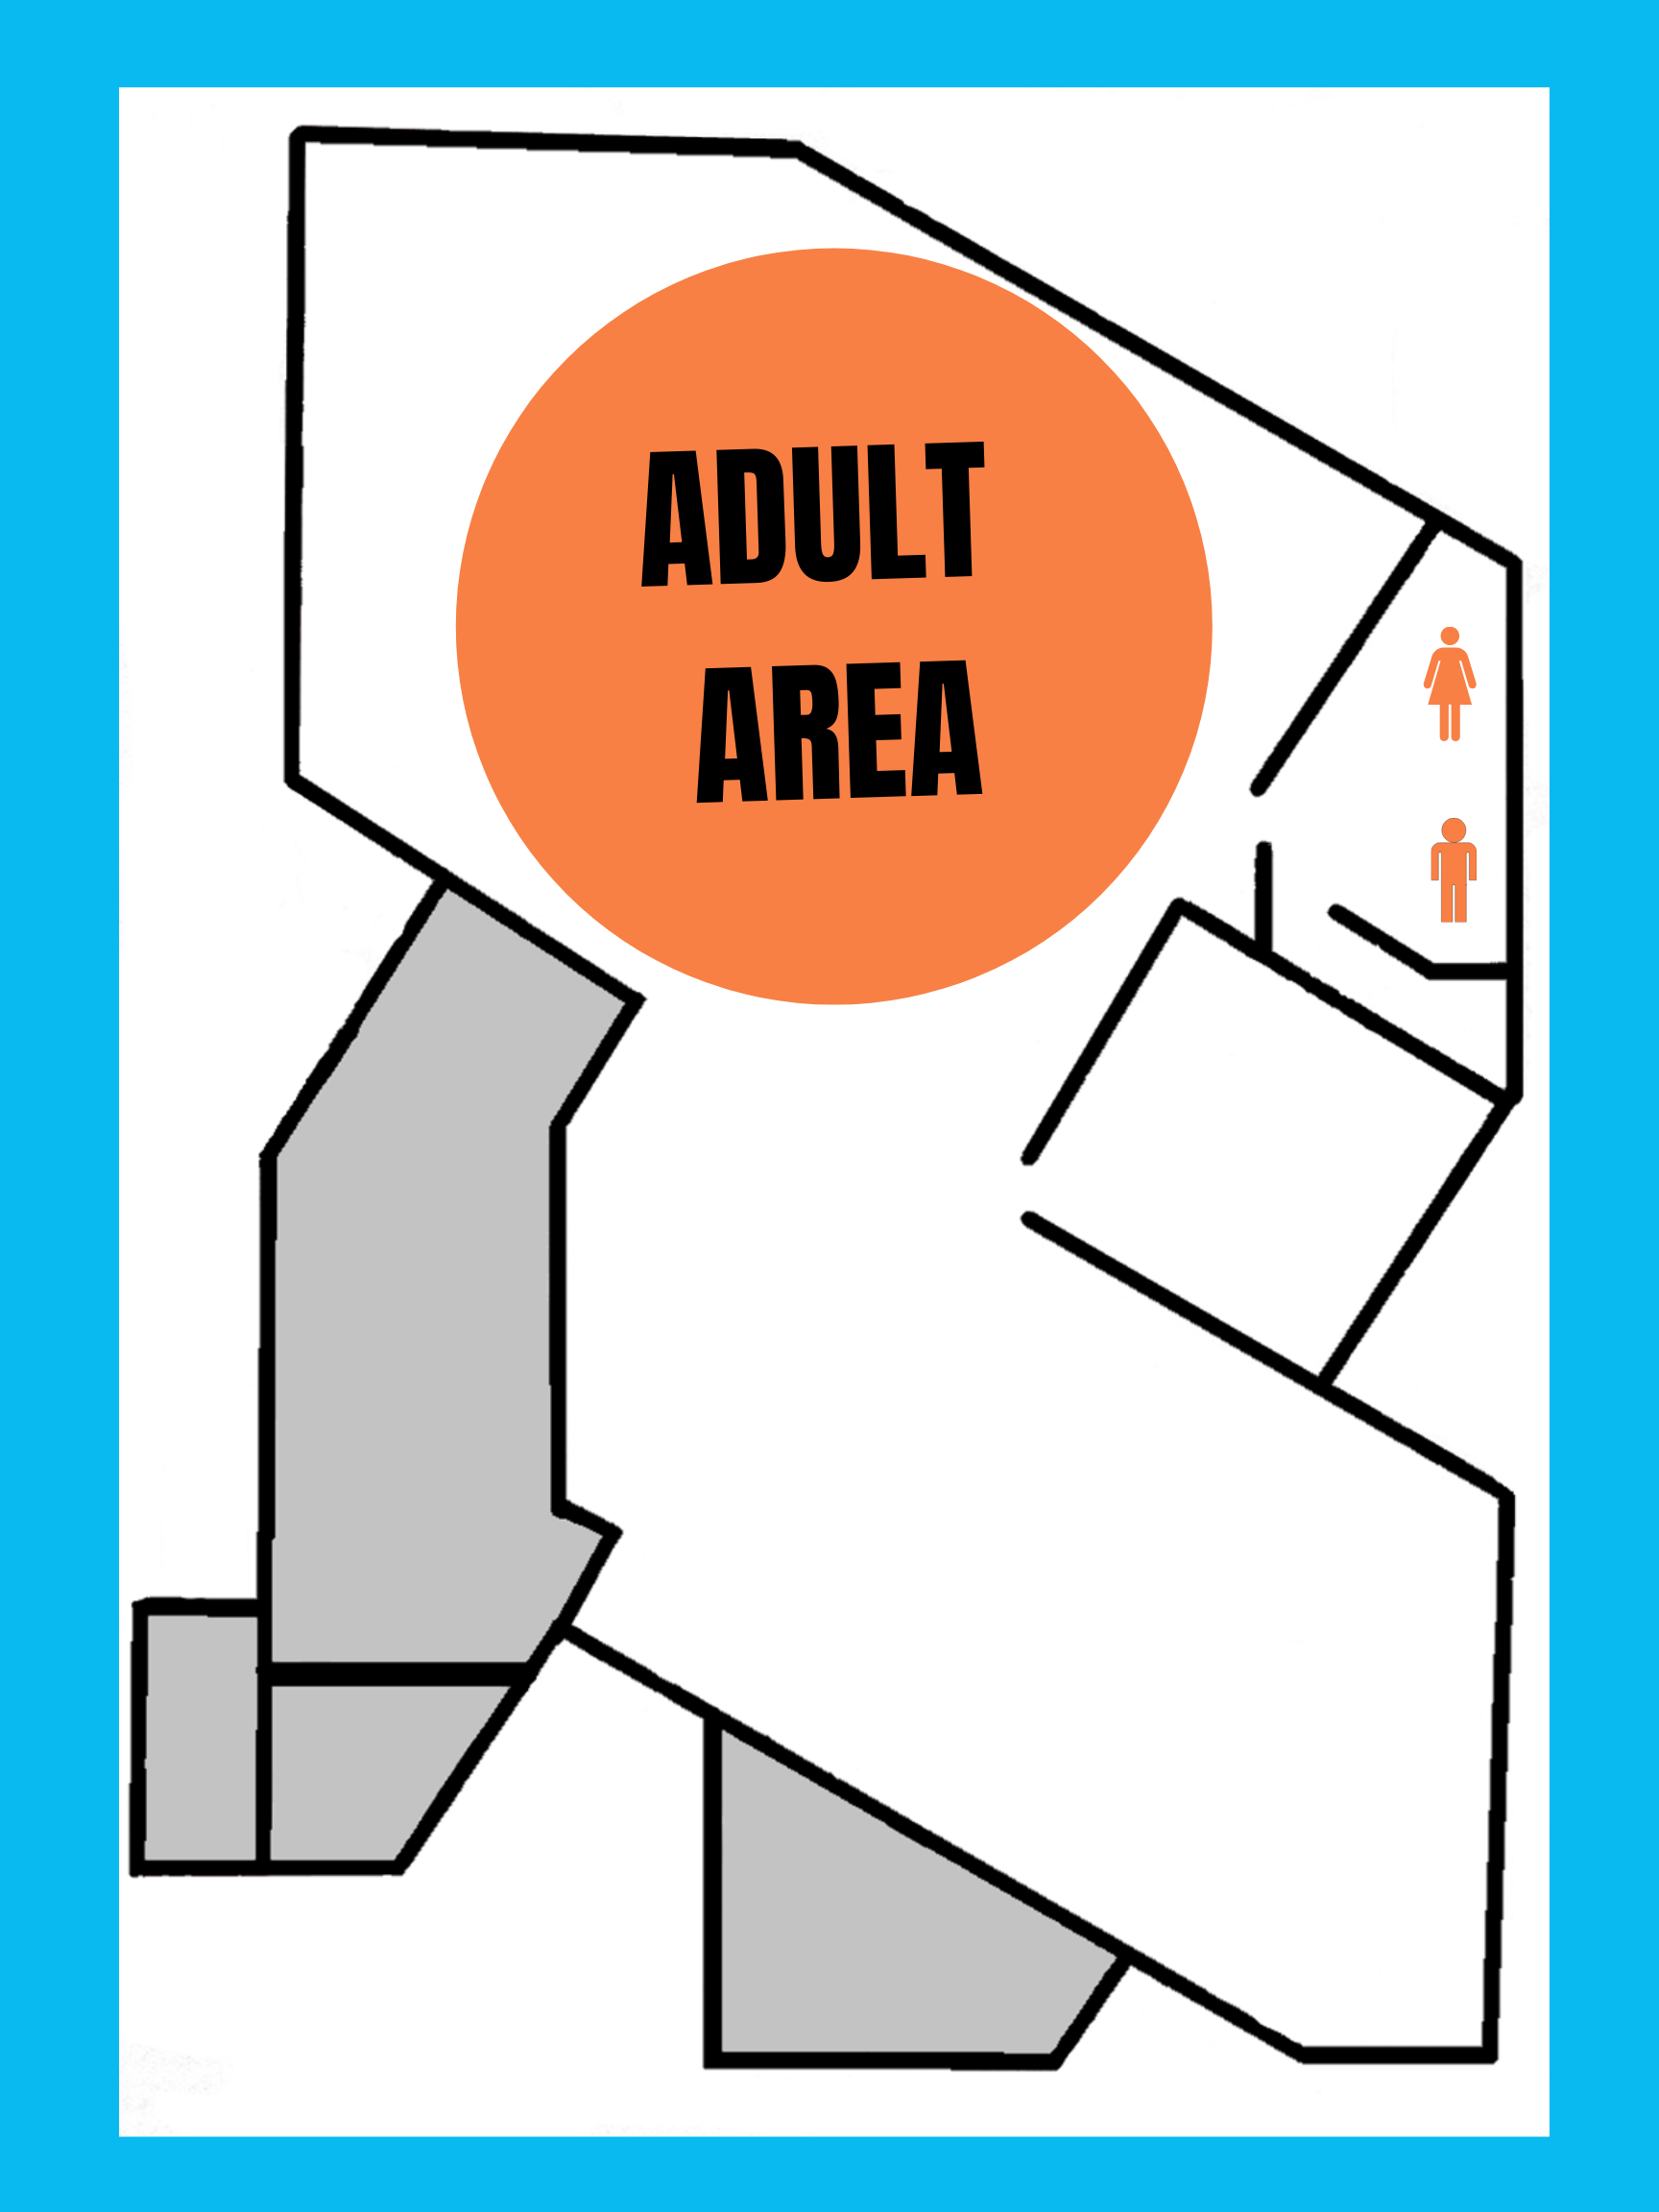 Map of floor plan of Troke Branch Library, with big orange dot showing the adult area